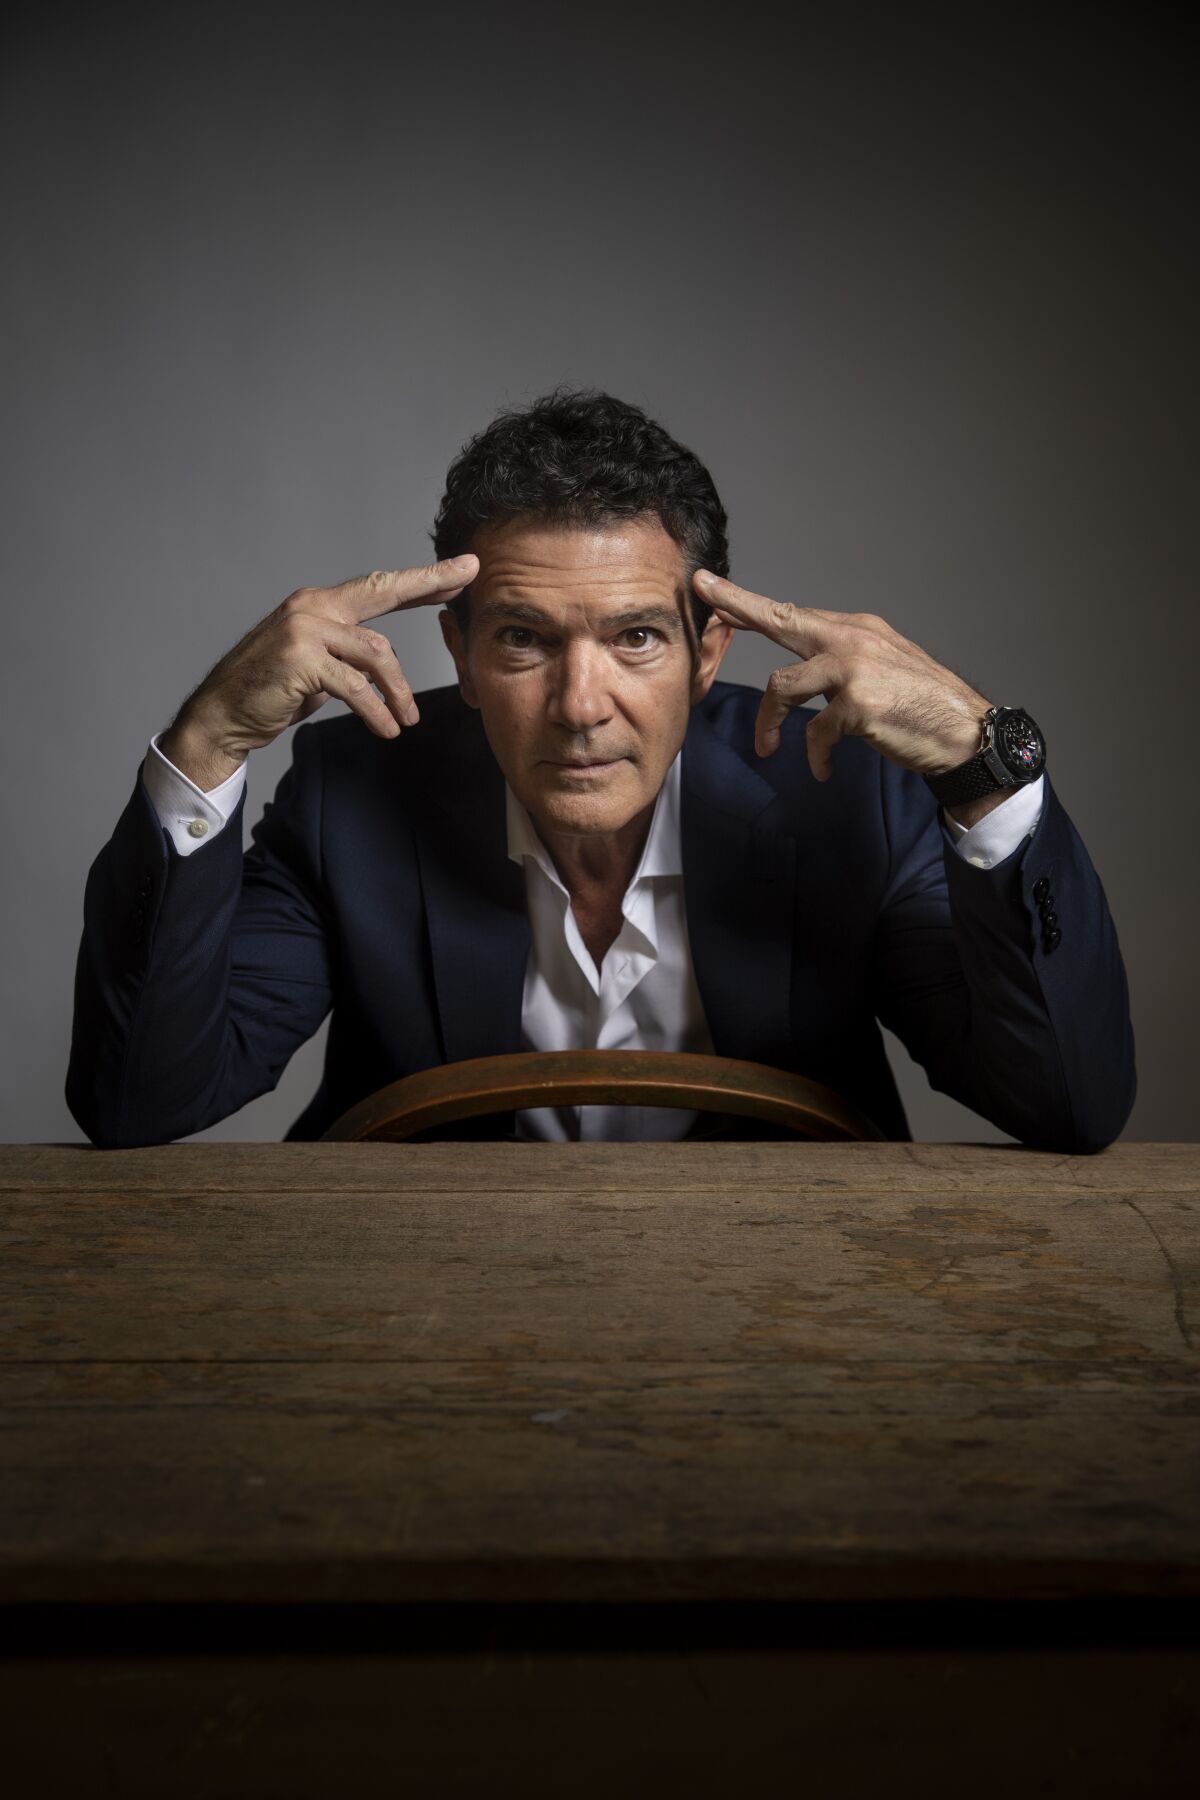 Antonio Banderas could earn his first Oscar nomination for his work in "Pain and Glory."